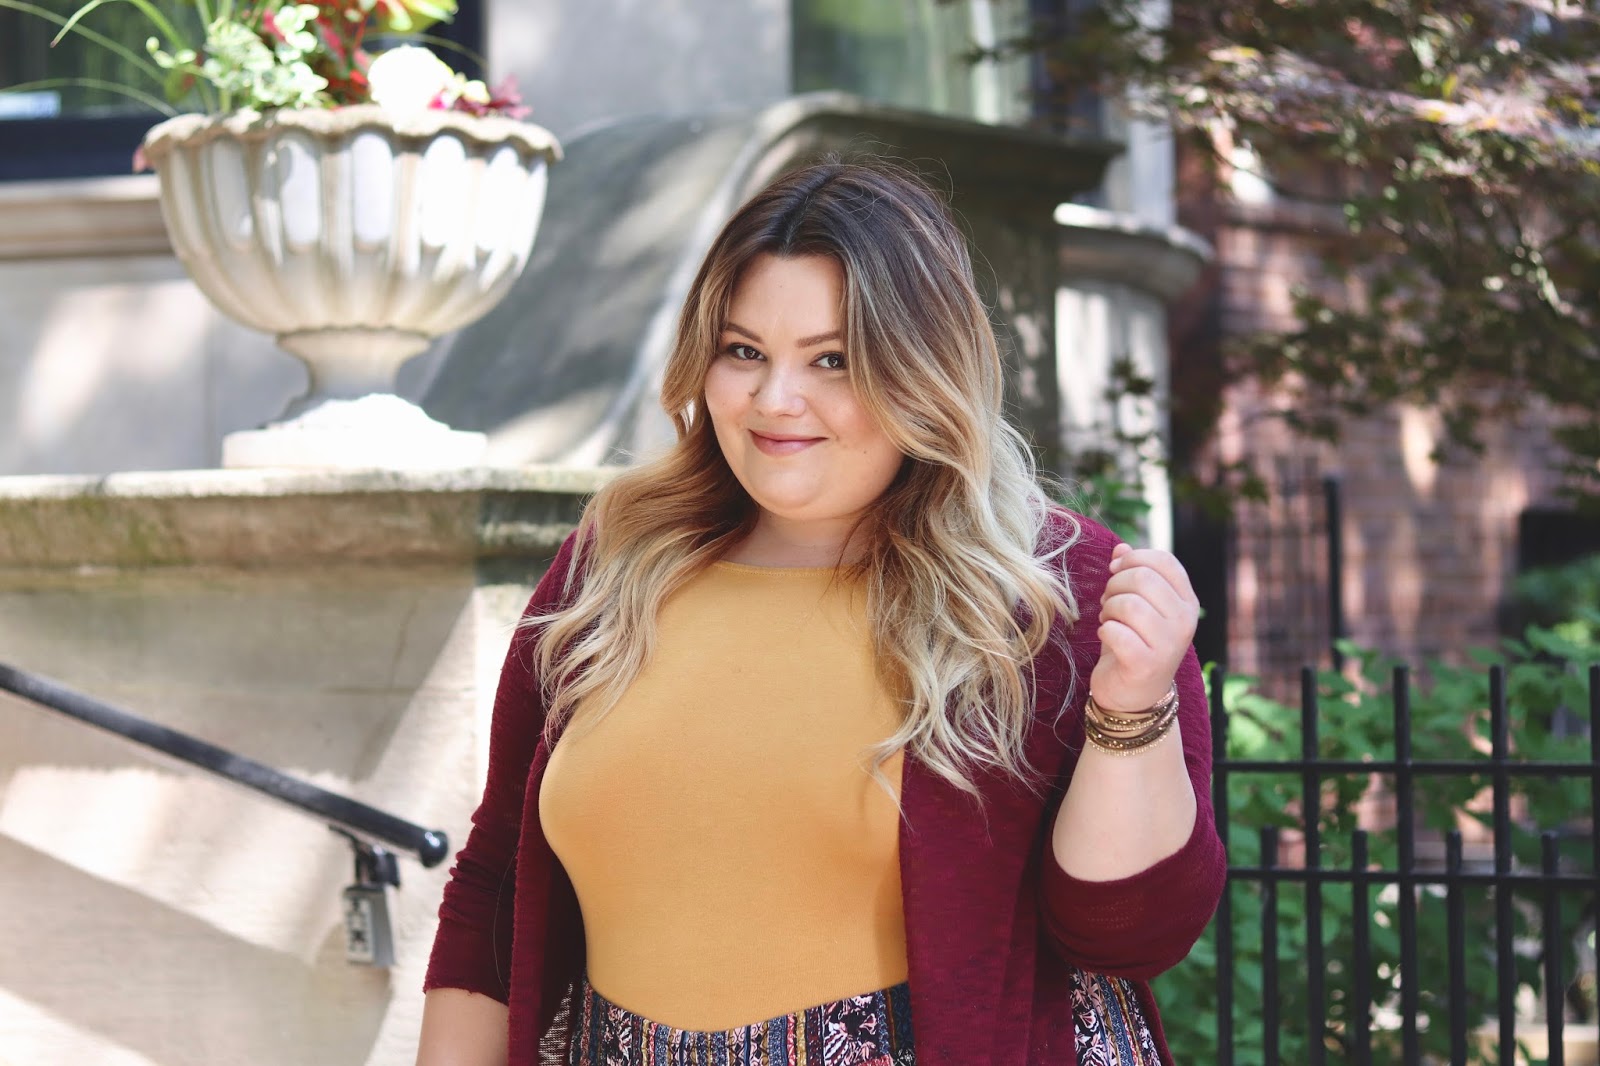 boho chic, plus size shorts, affordable plus size clothes, natalie craig, natalie in the city, Chicago fashion blogger, plus size blogger, Chicago plus size, fatshion, curves and confidence, midwest style, plus size summer outfits, how to stop chub rub, chub rub, stitch fix, forever 21 plus, bodysuits, plus size bodysuits